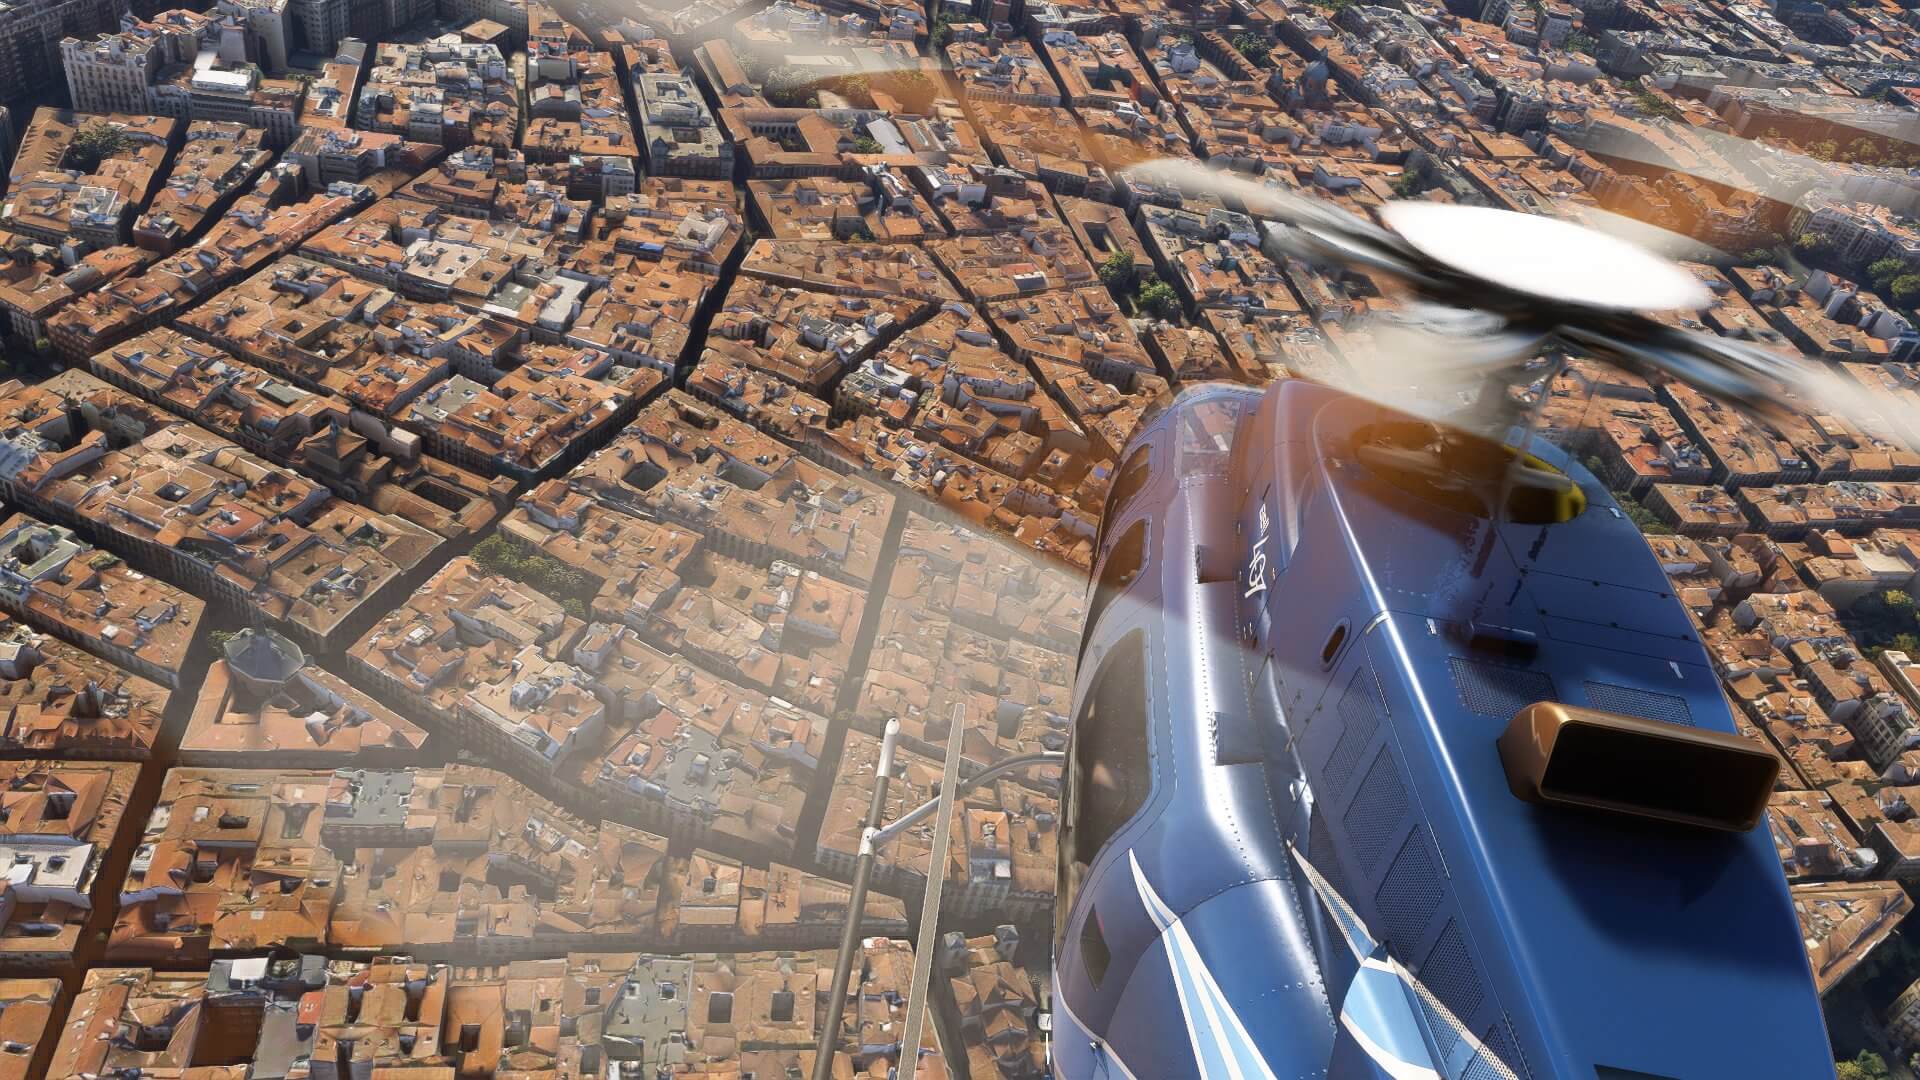 A Bell 407 helicopter flying above densely packed buildings in Barcelona, Spain